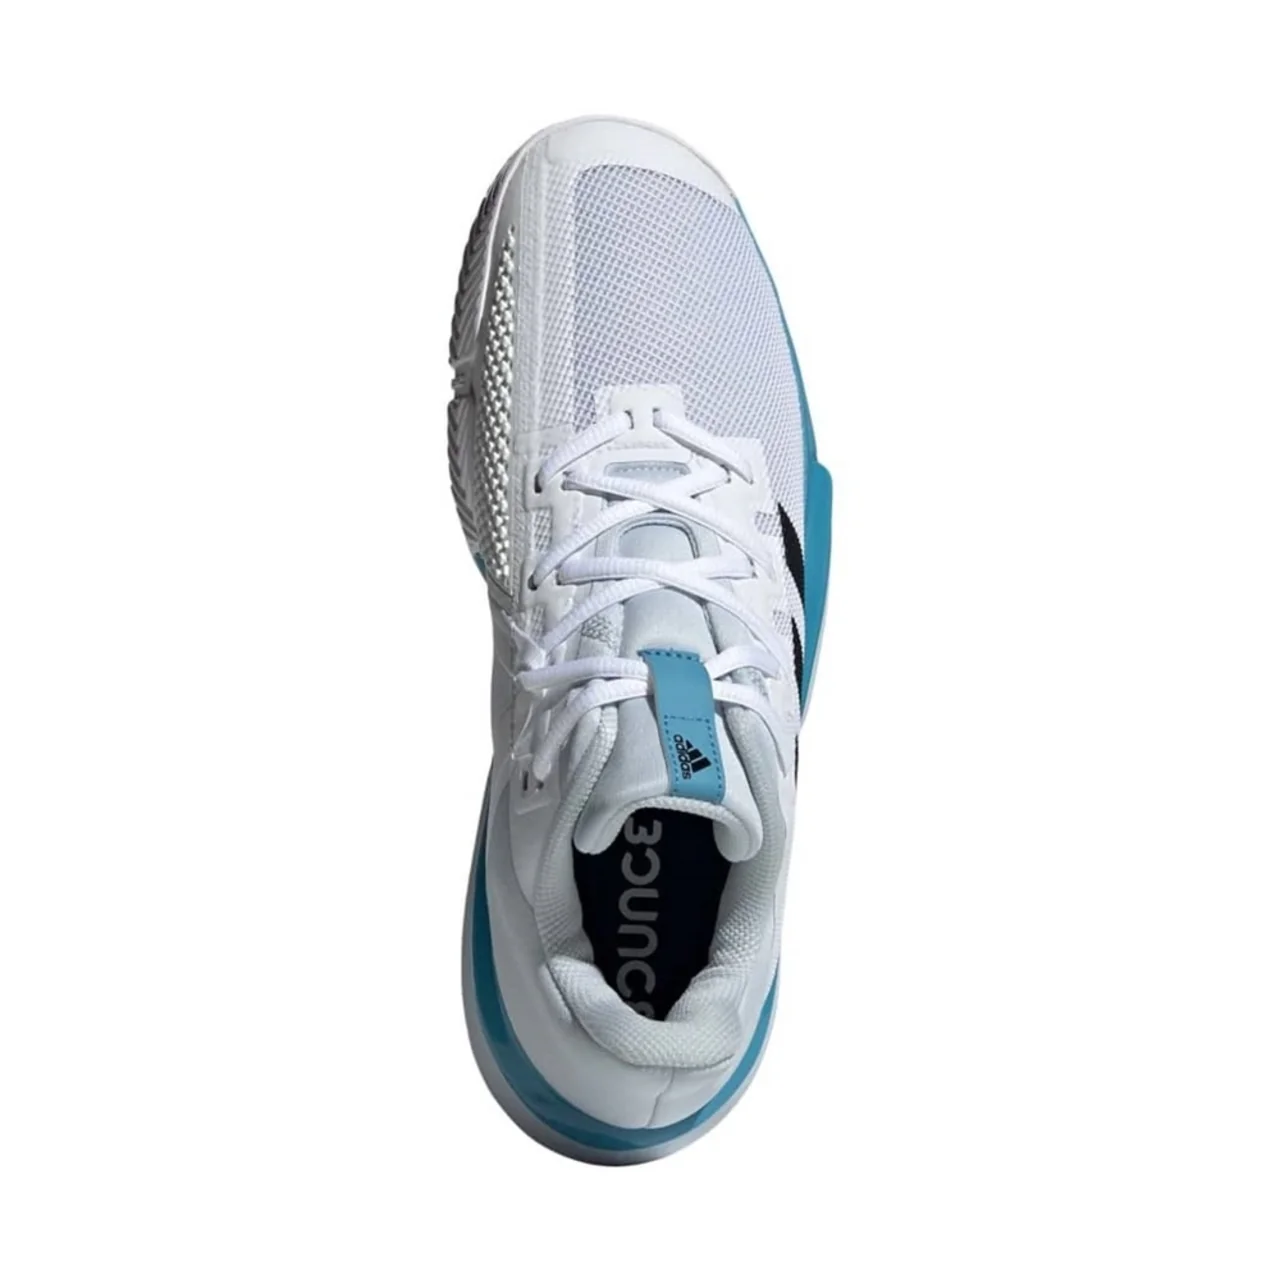 Adidas SoleMatch Bounce M Tennis/Padel White 2021